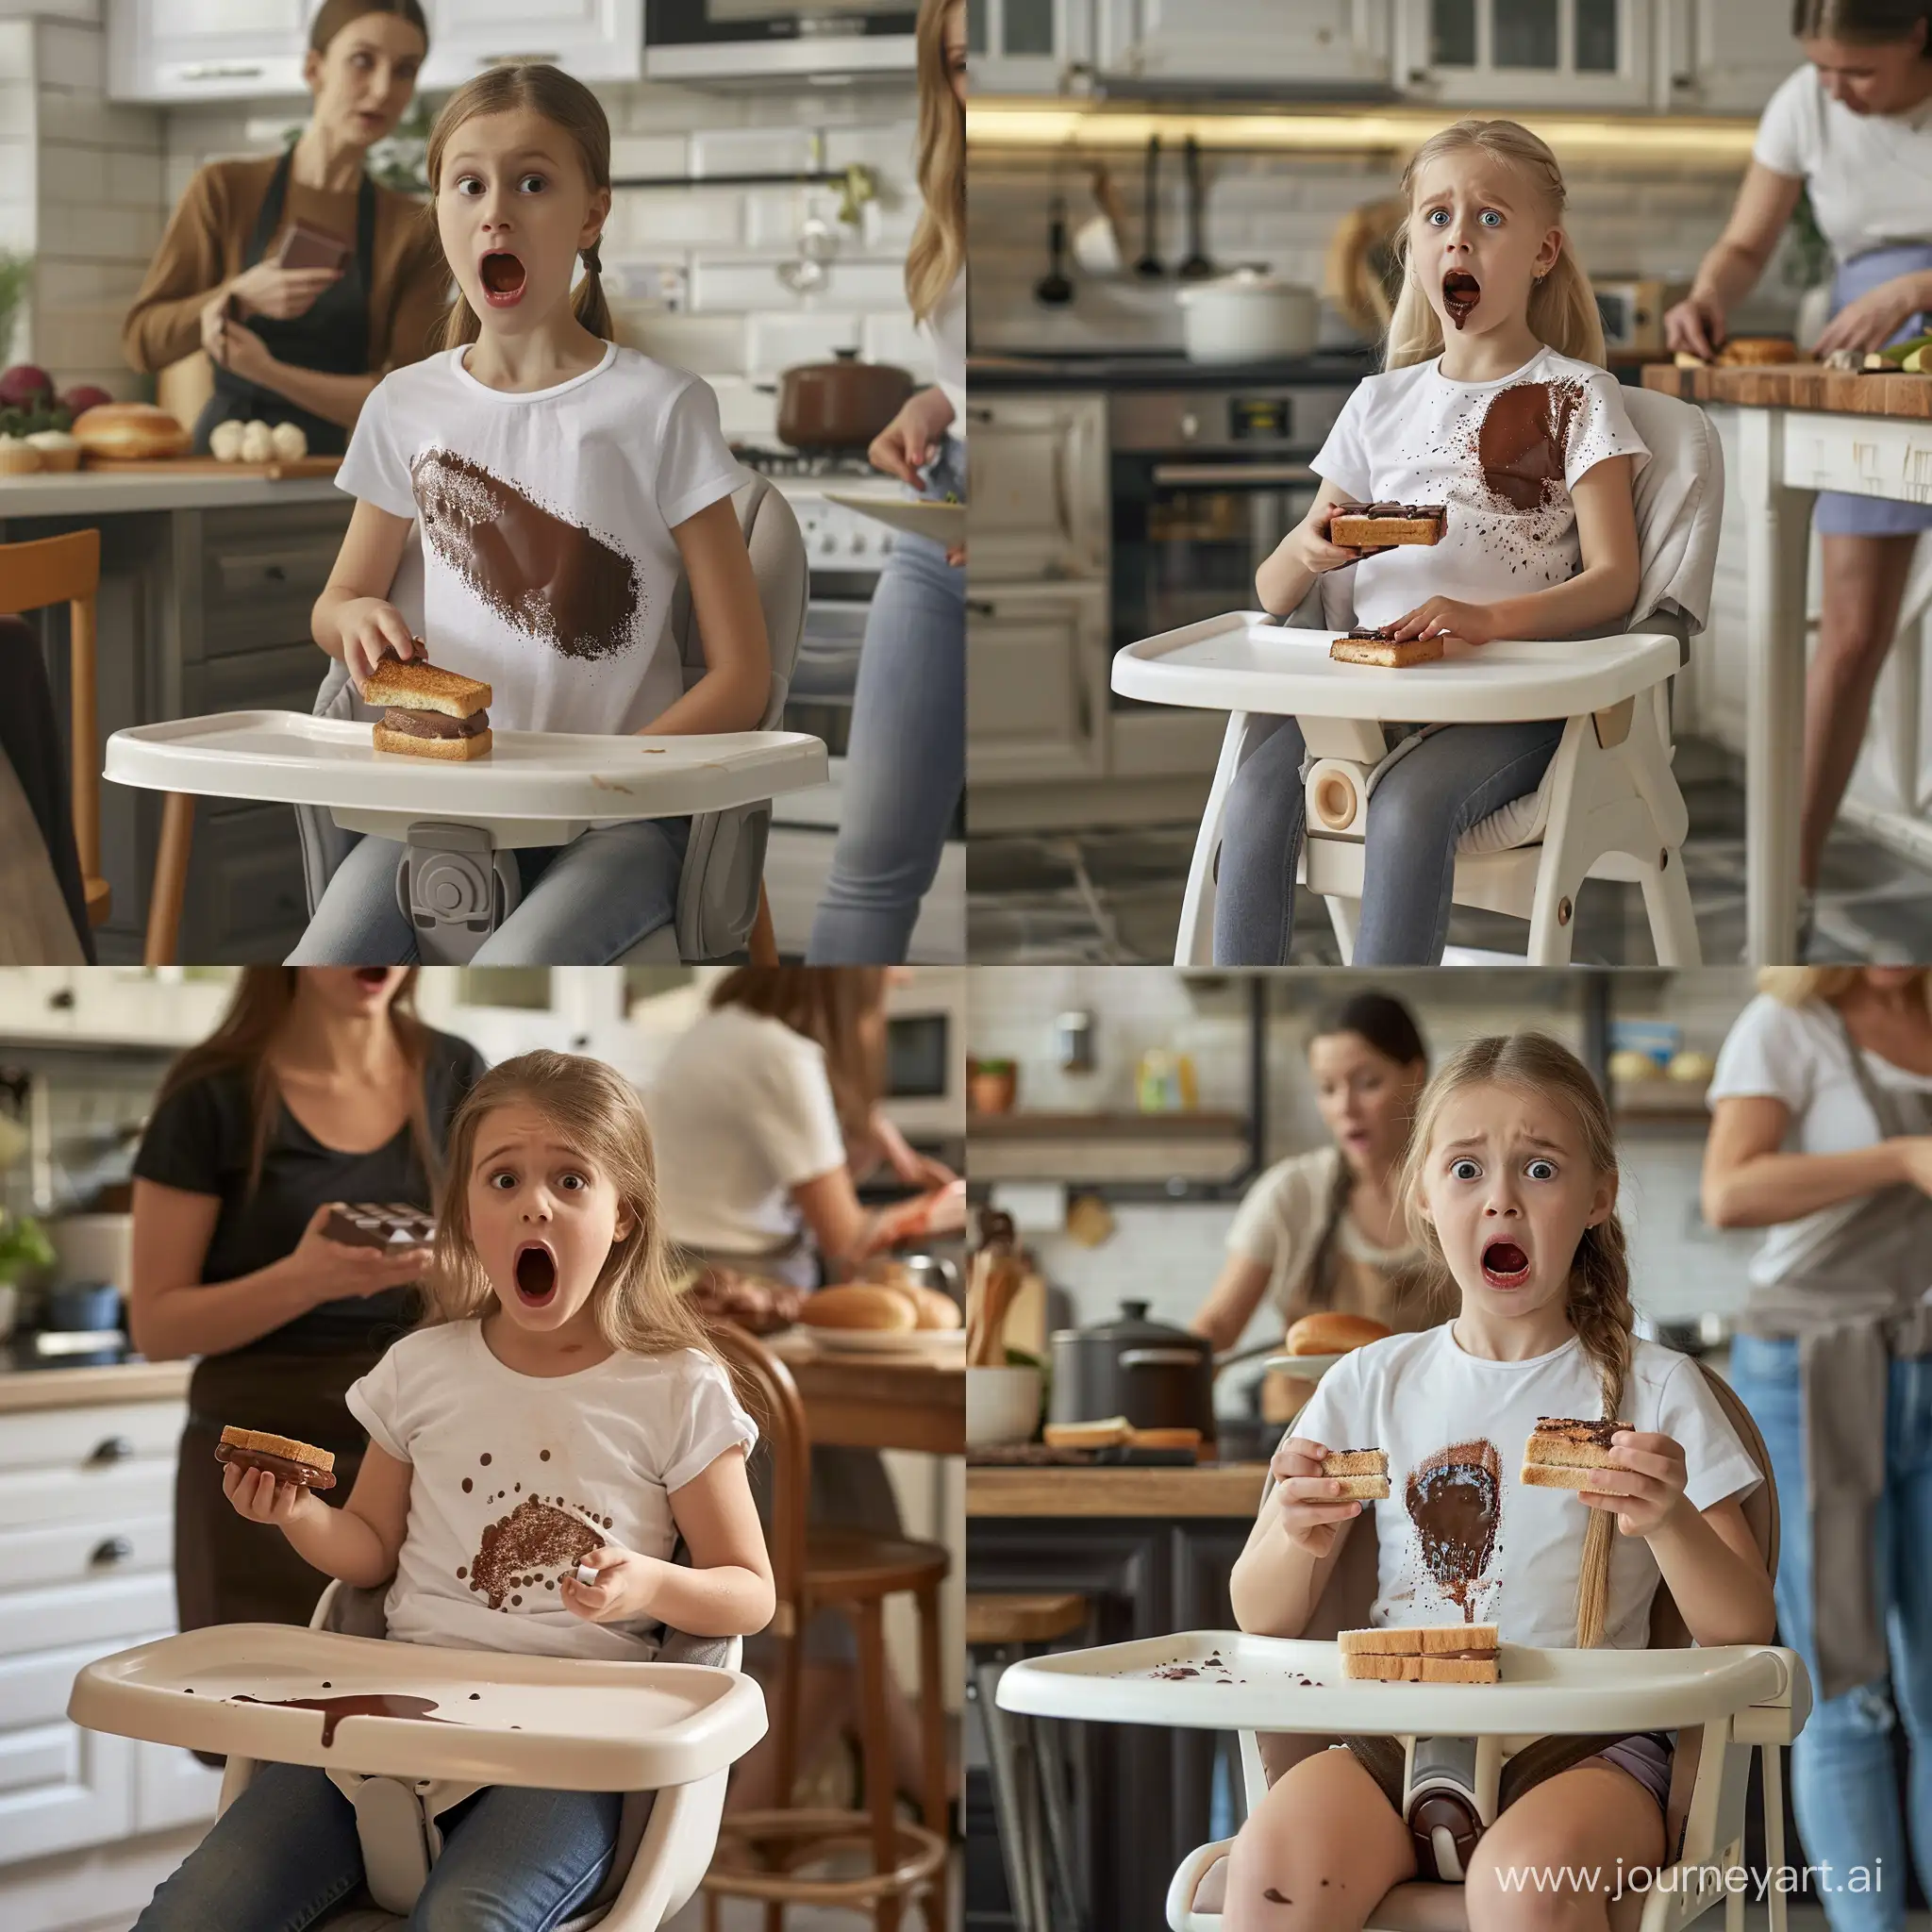 Surprised-Girl-Holding-Chocolate-Sandwich-in-Kitchen